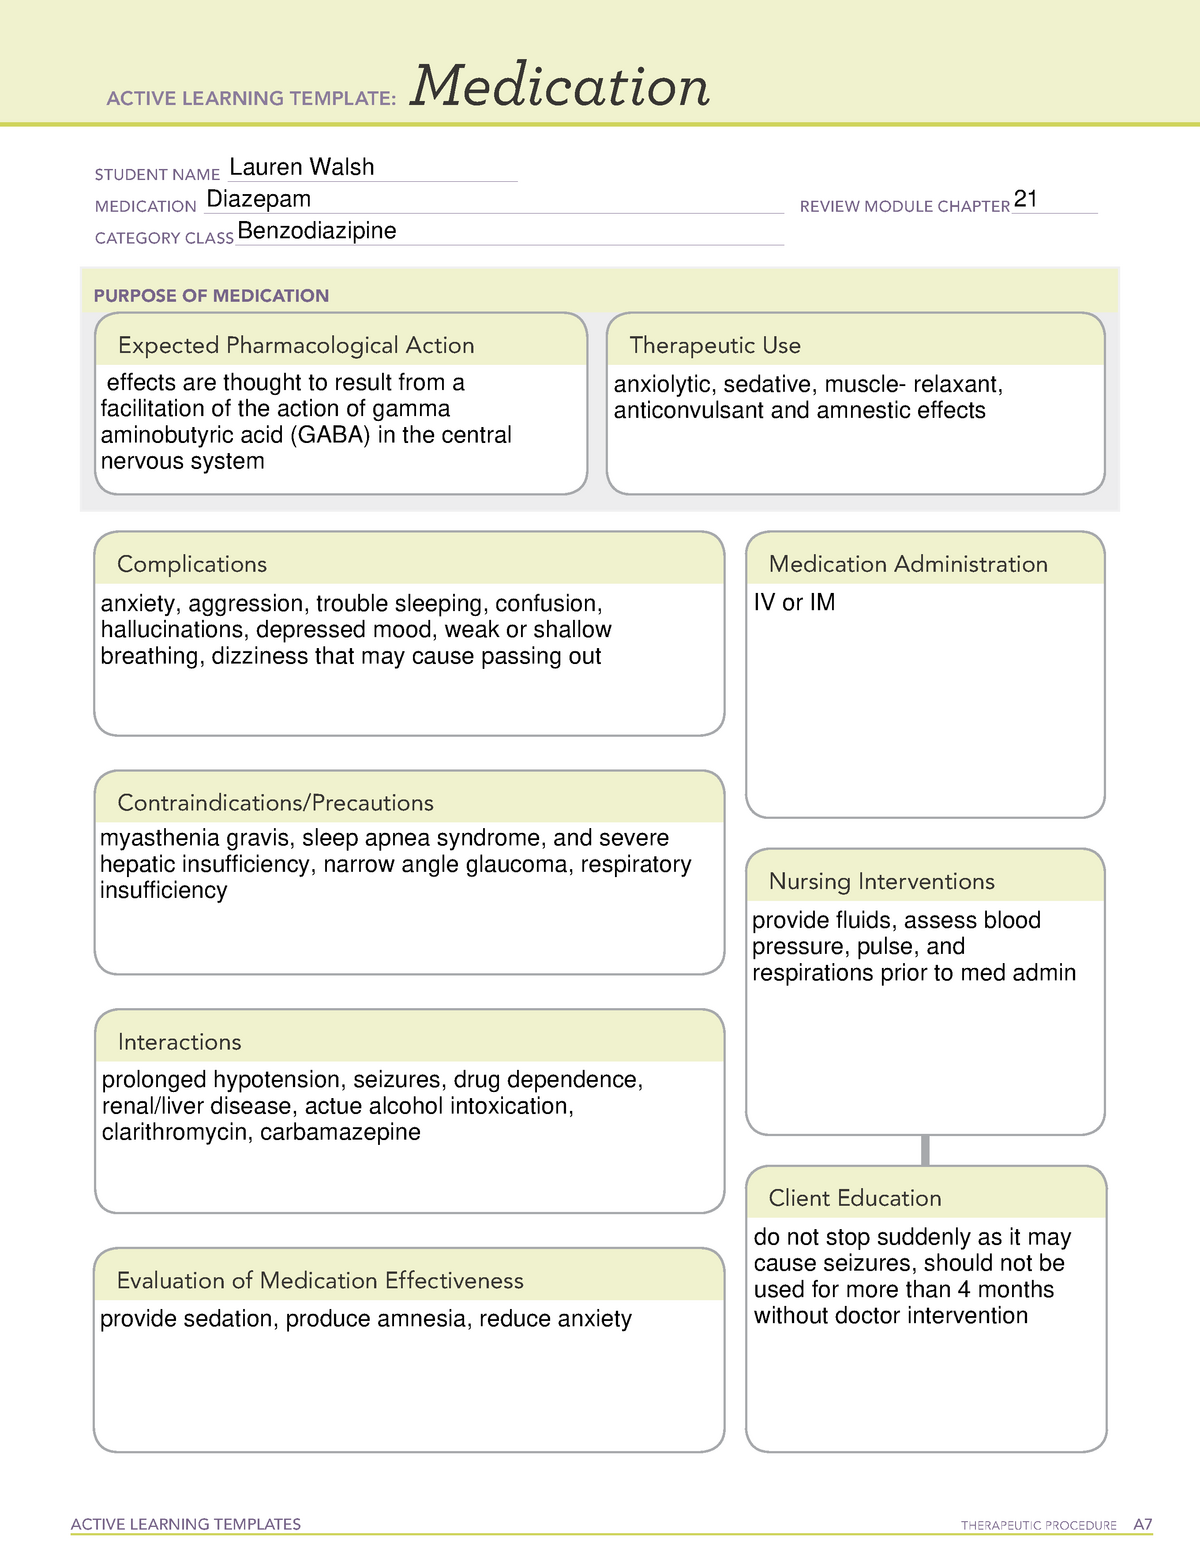 Diazepam ALT active learning template ACTIVE LEARNING TEMPLATES